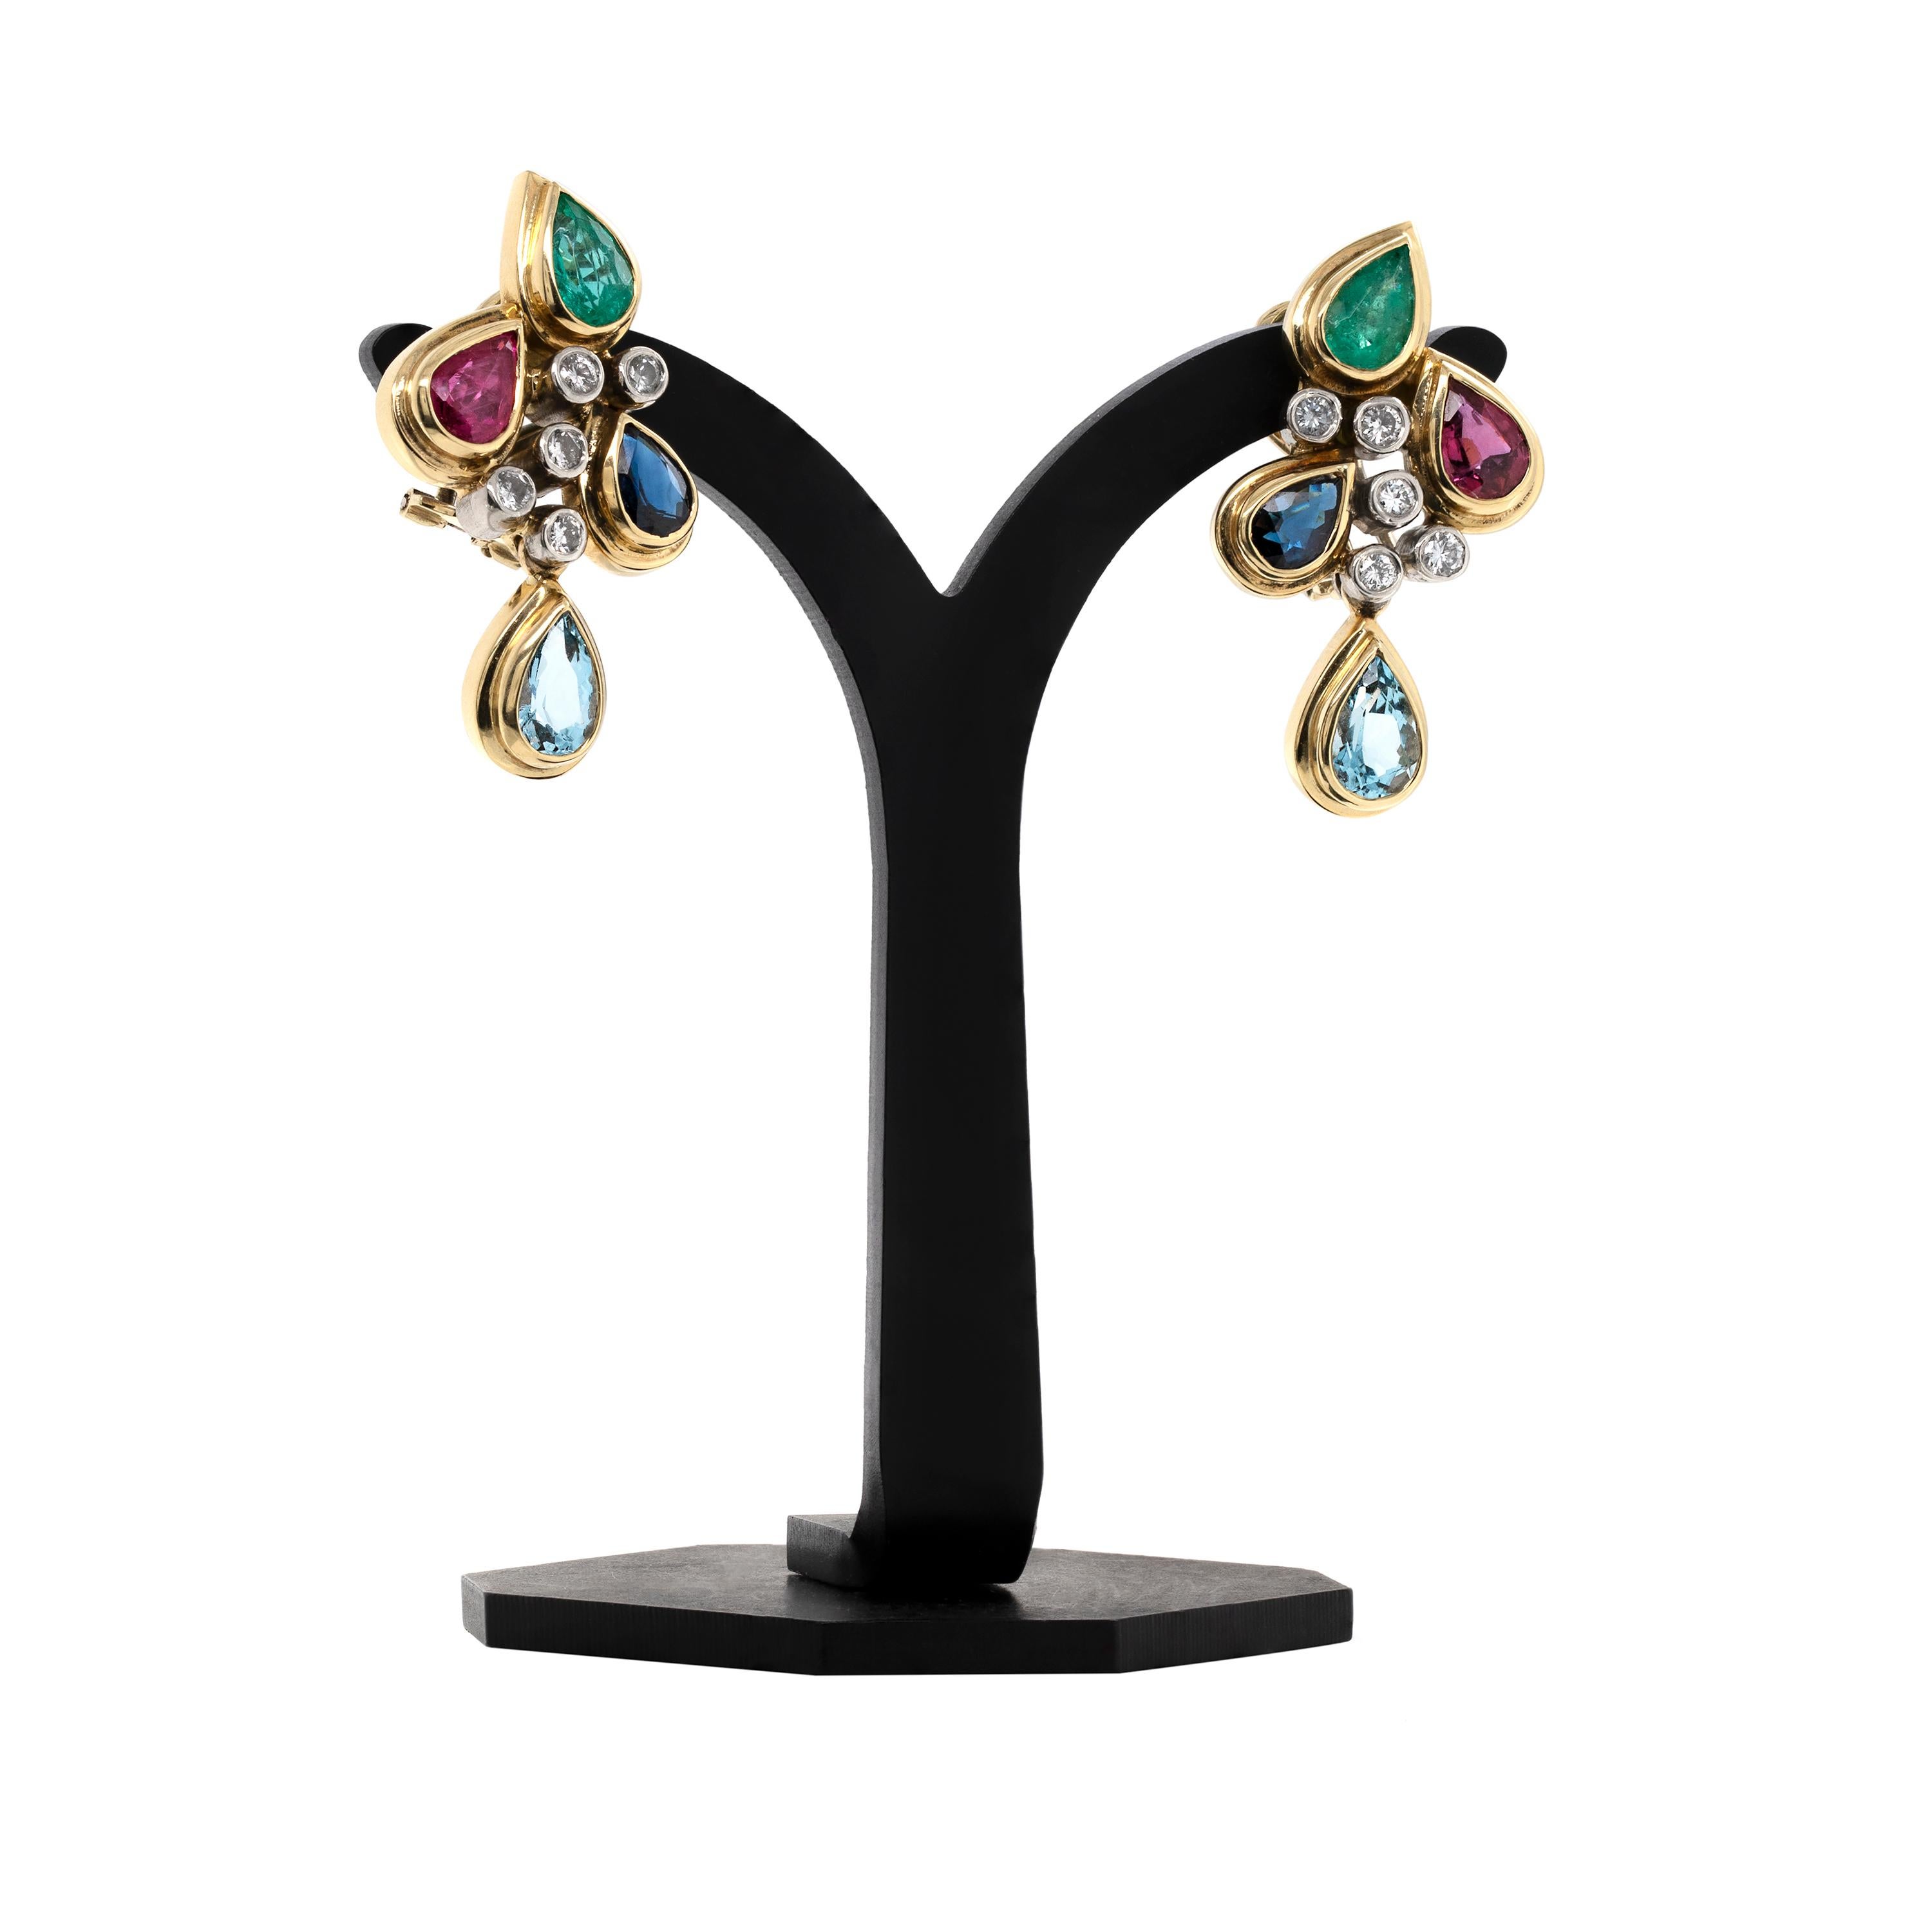 These beautiful clip-on cocktail cluster earrings feature a wonderful selection of coloured gemstones. Each earring is rubover set with a pear shaped ruby, blue sapphire, emerald and aquamarine estimating to weigh 0.50ct each. The earrings are